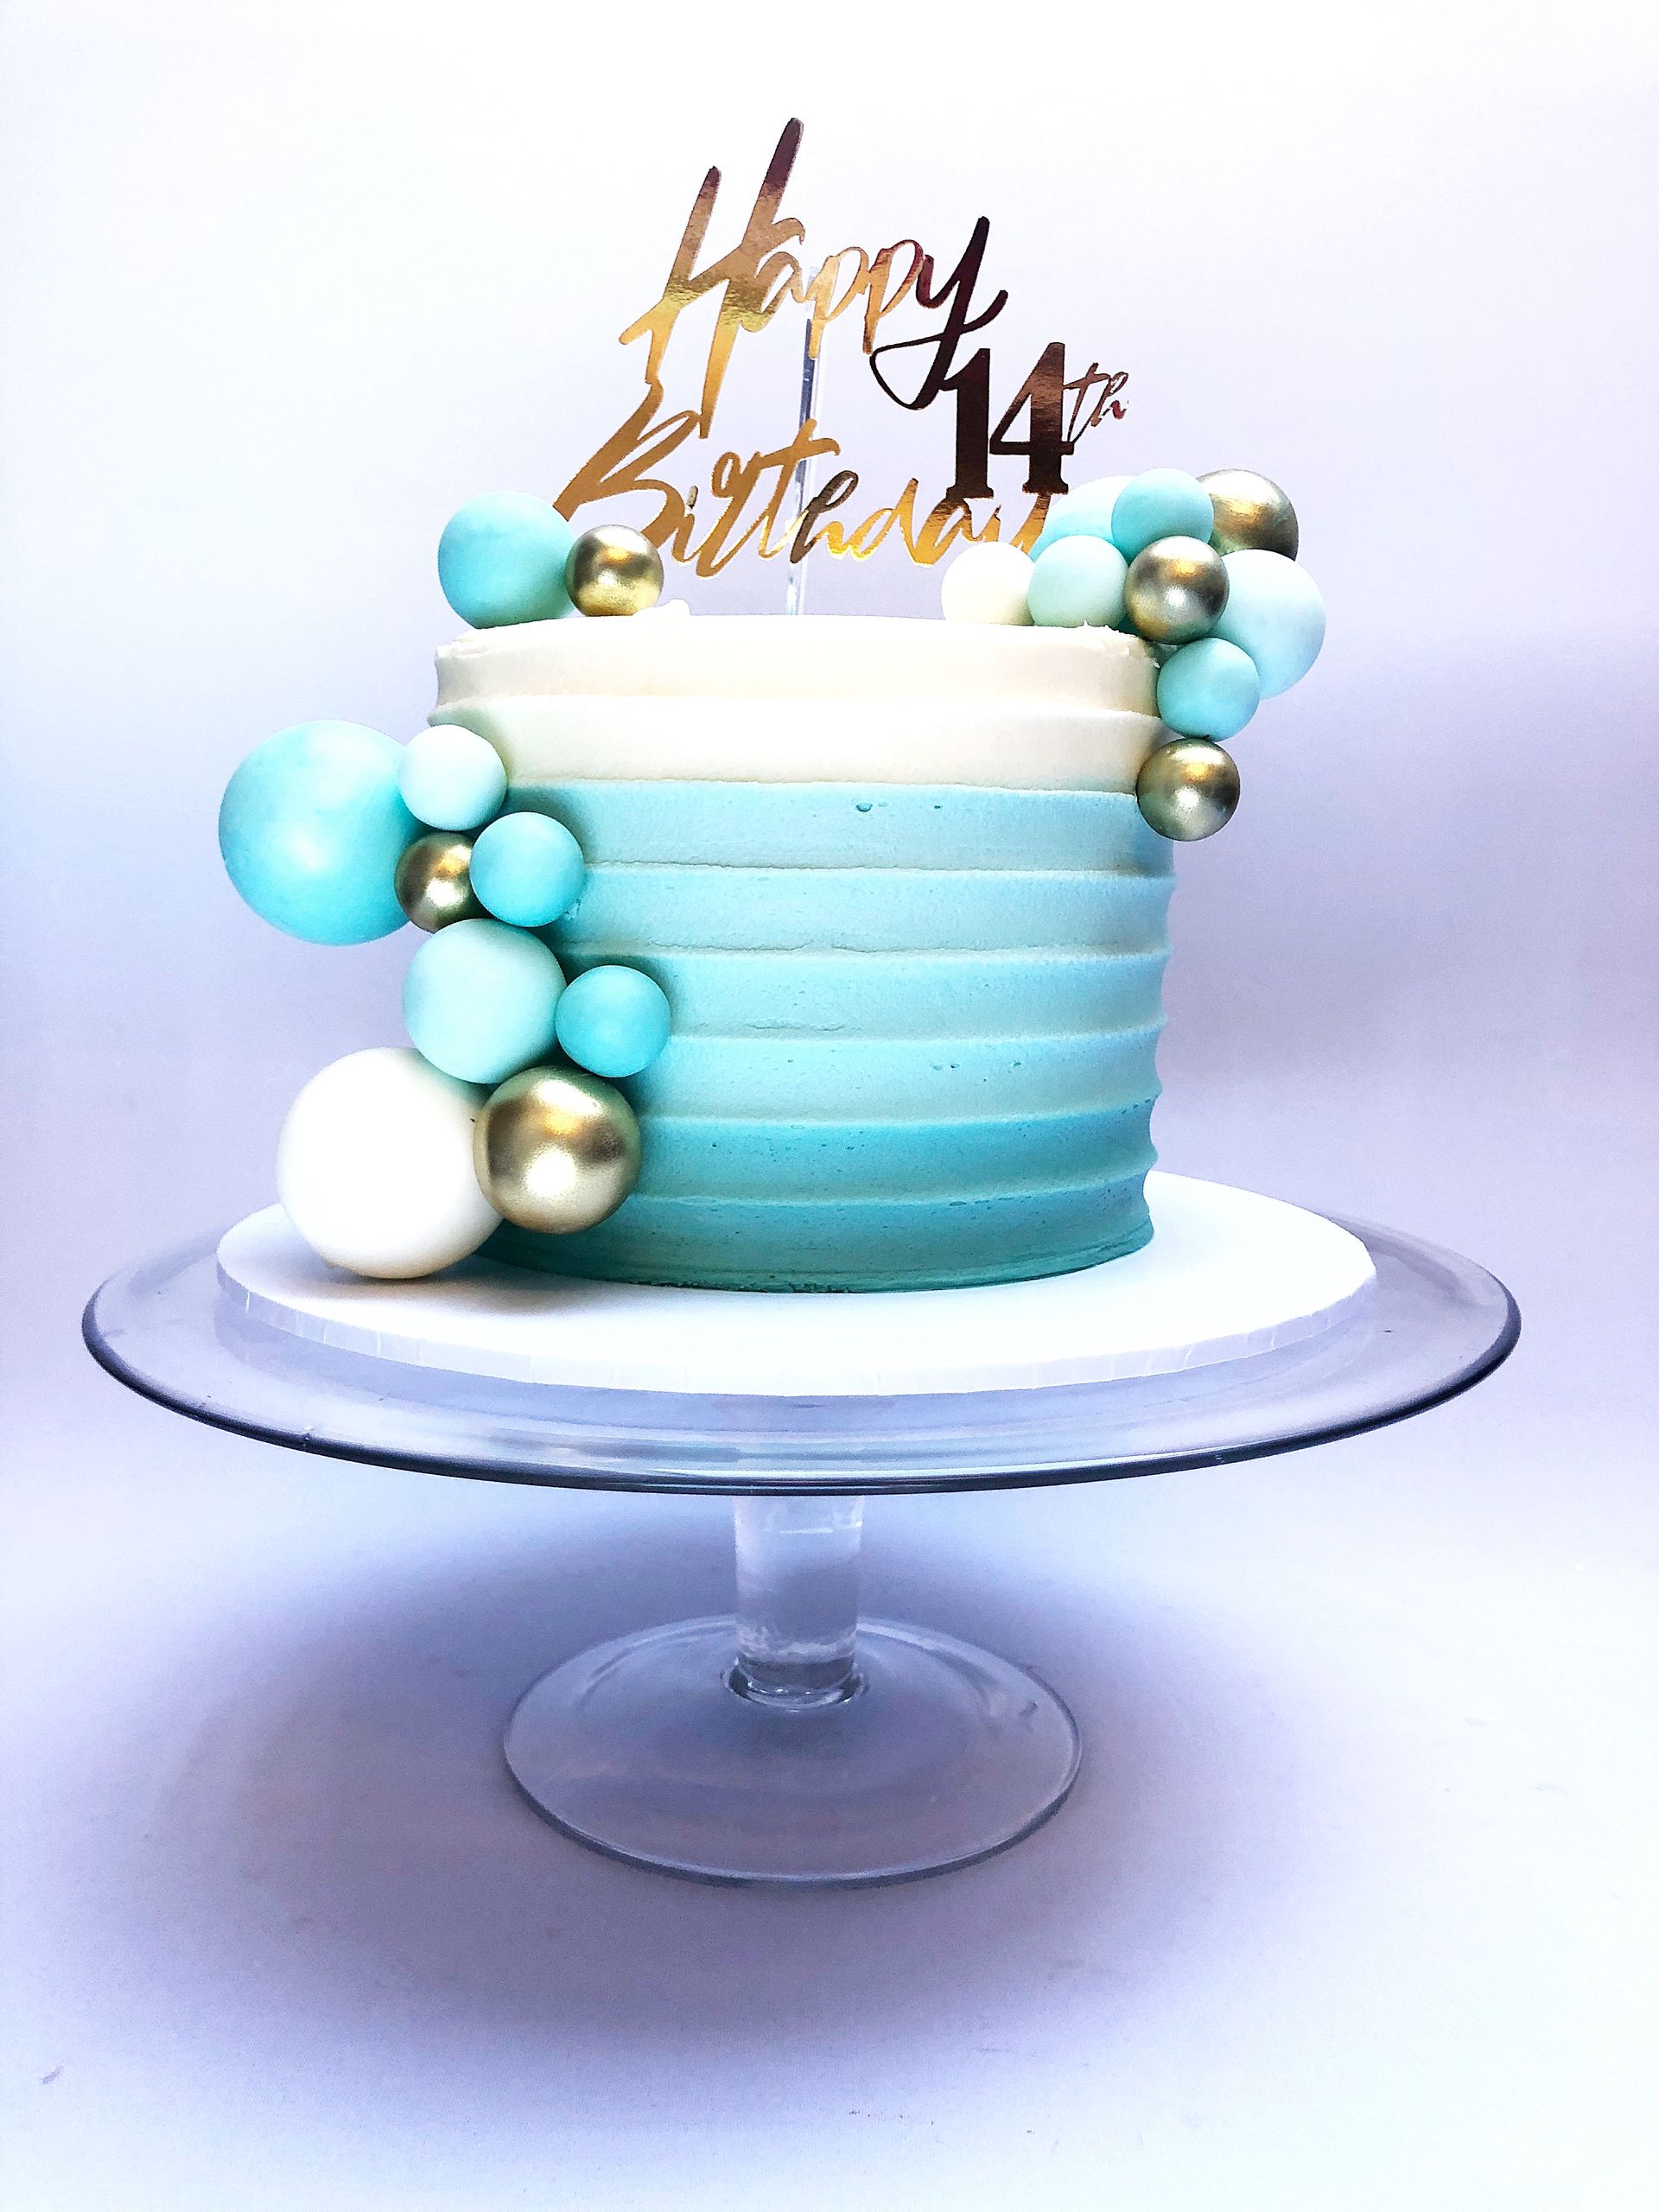 Elegant cake with blue ombre effect fading up to ivory at the top of the cake. White, gold and blue balls and a gold cake topper adorn the cake.